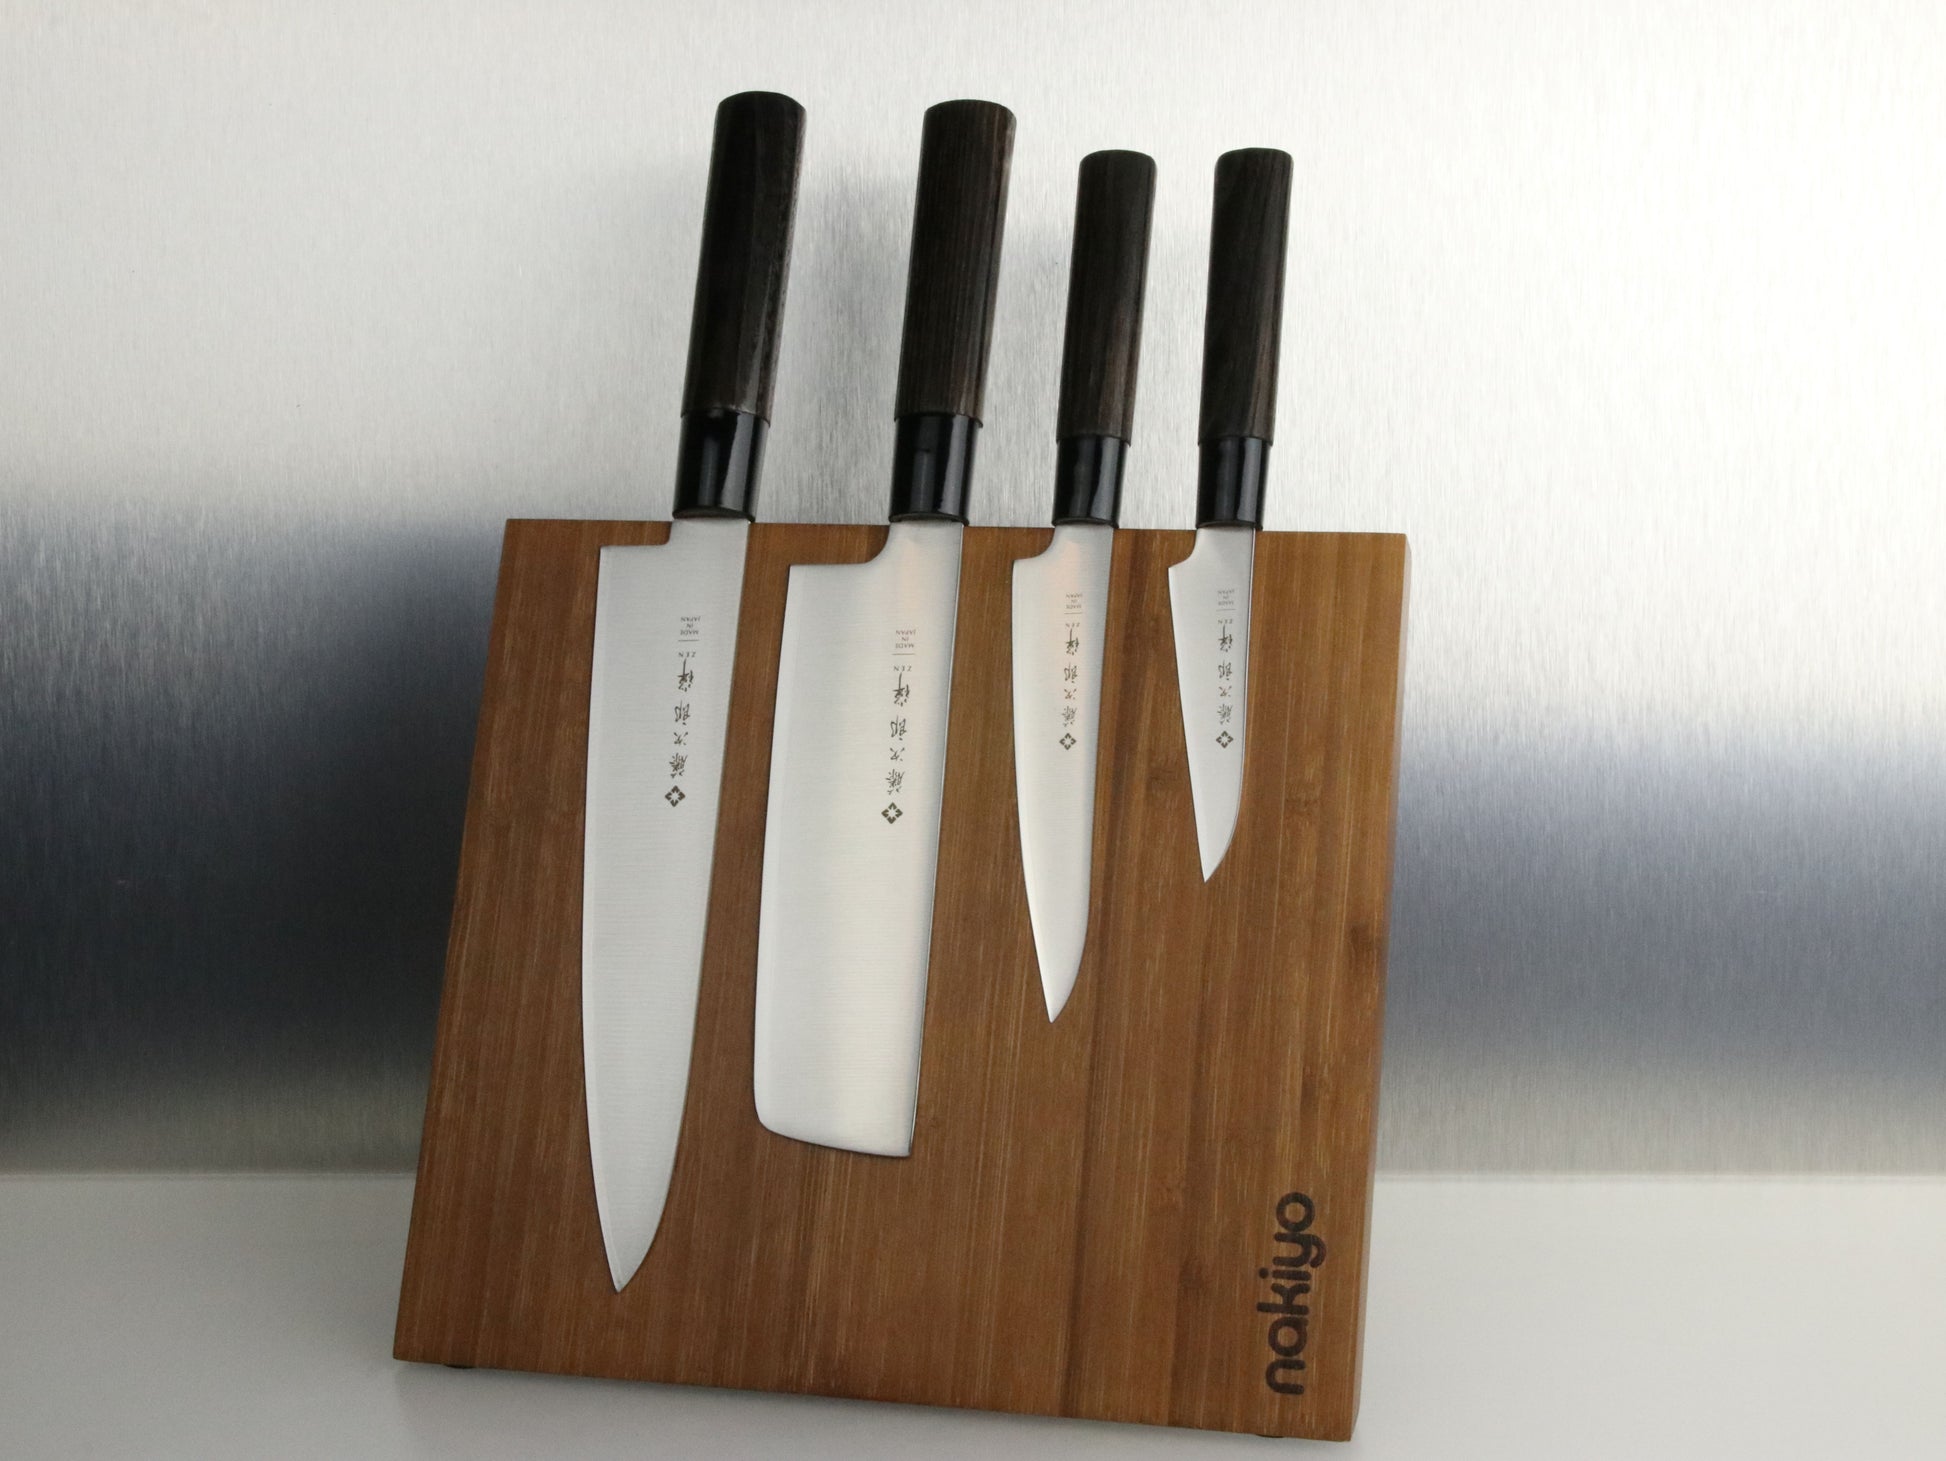 Home Kitchen Magnetic Knife Block Holder Rack Magnetic Stands with